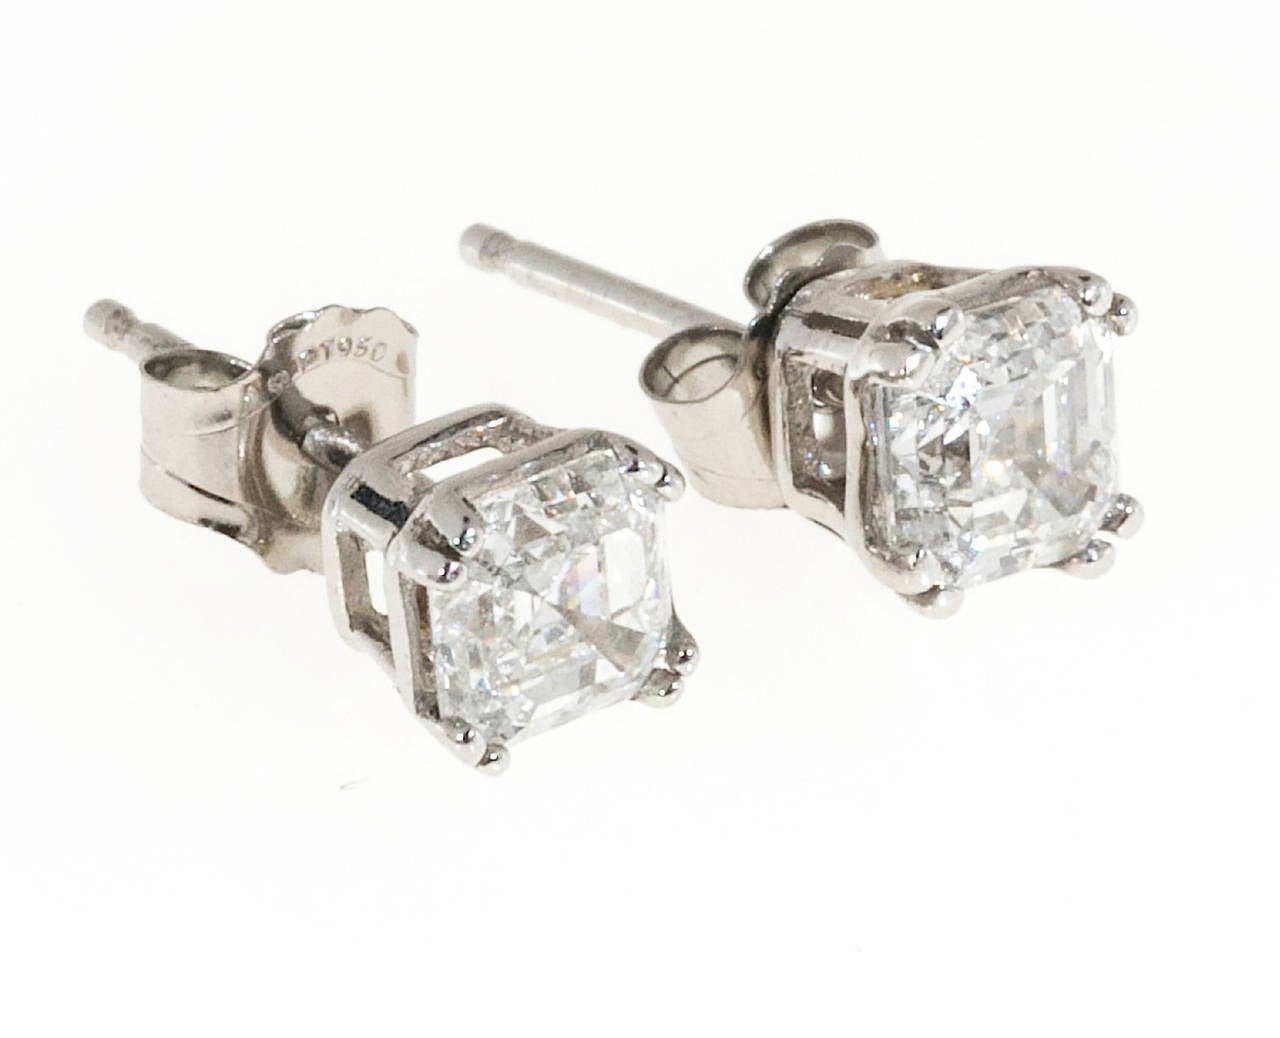 Asscher cut diamond studs.should look like. Distinct repeating faceting visible from every angle. Small table, raised crown. Cut off corners, handmade Platinum. Double prong setting to show off the G, VS diamond. The settings are brand new. The